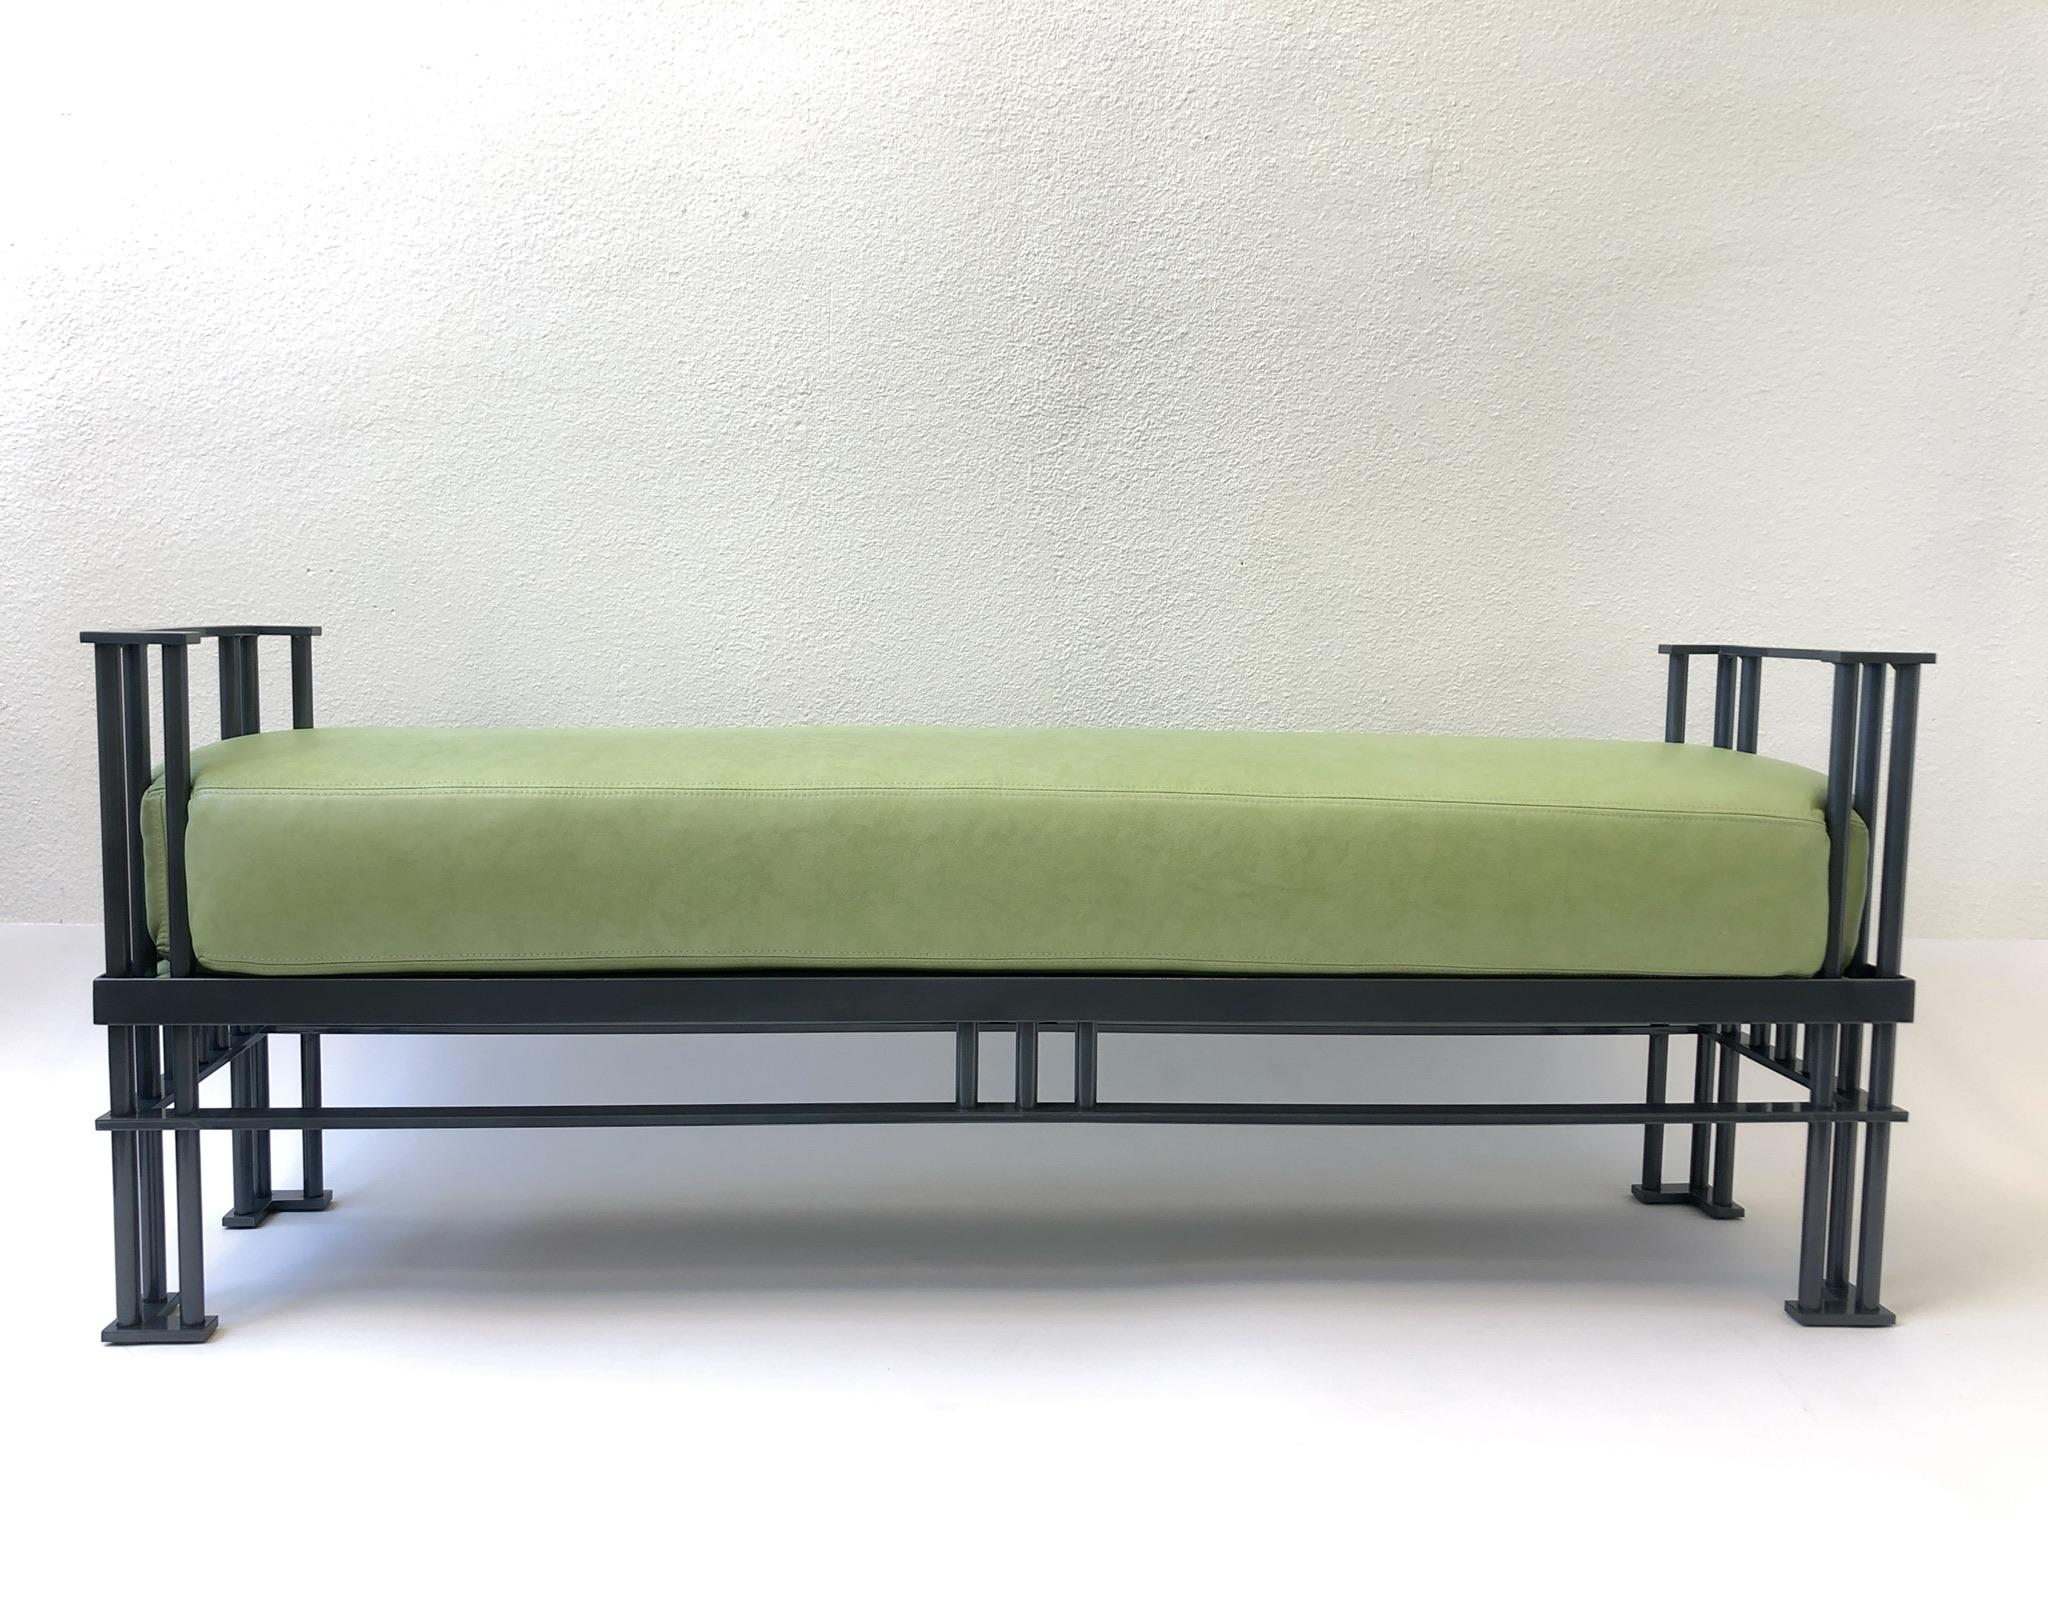 A spectacular 1980s Italian Postmodern bench. The bench is constructed of steel that’s powder coated in a metallic gray and the cushion is a soft light green leather. This bench came out off a Steve Chase project in Rancho Mirage.  

Dimension: